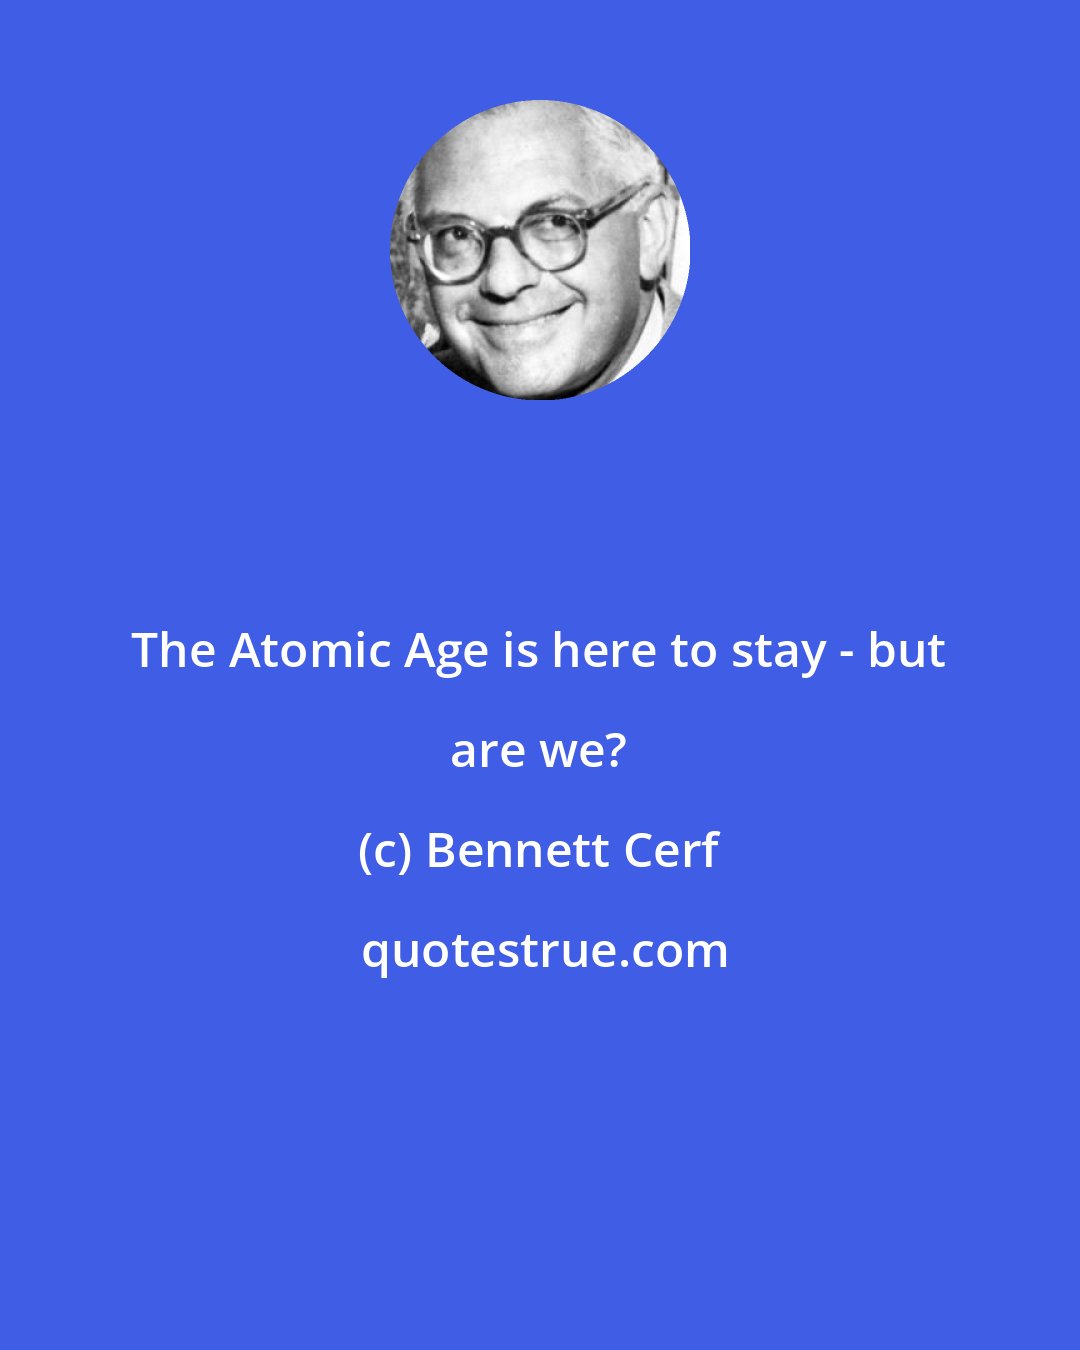 Bennett Cerf: The Atomic Age is here to stay - but are we?